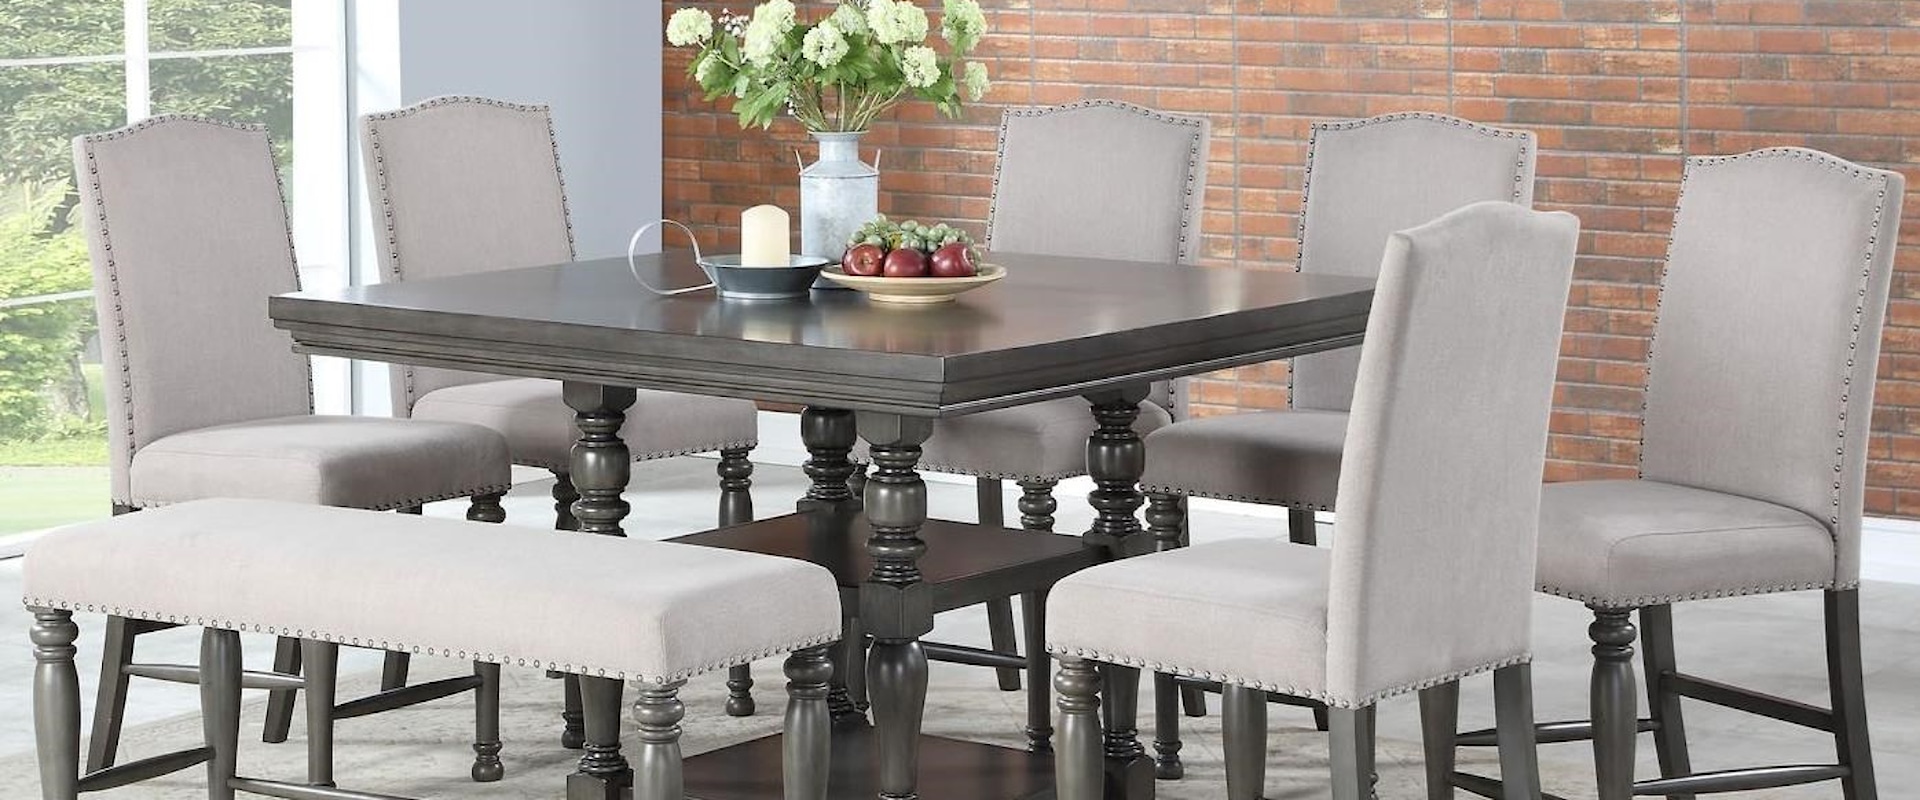 Eight Piece Traditional Counter Height Dining Set with Bench